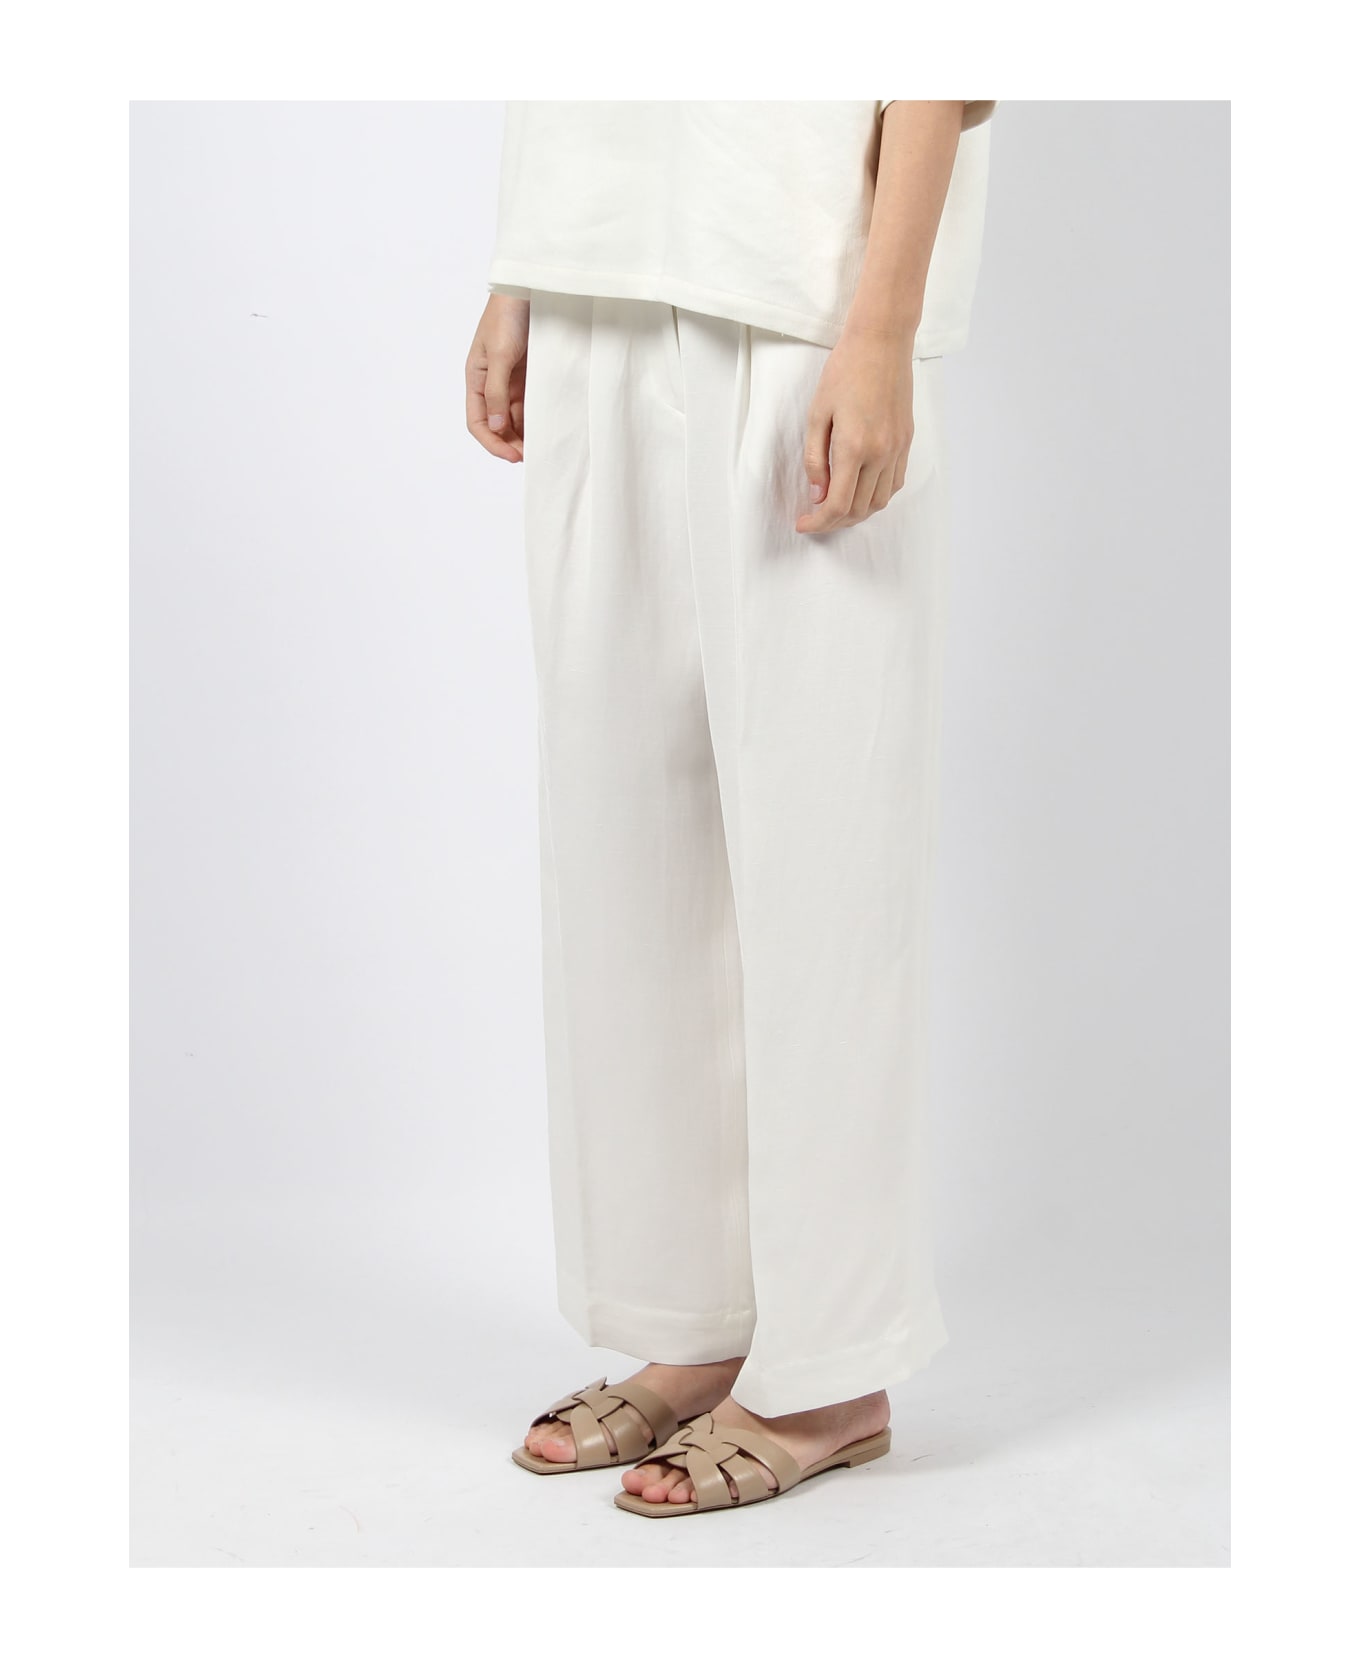 Nine in the Morning Rubino Culotte Pence Trousers - White